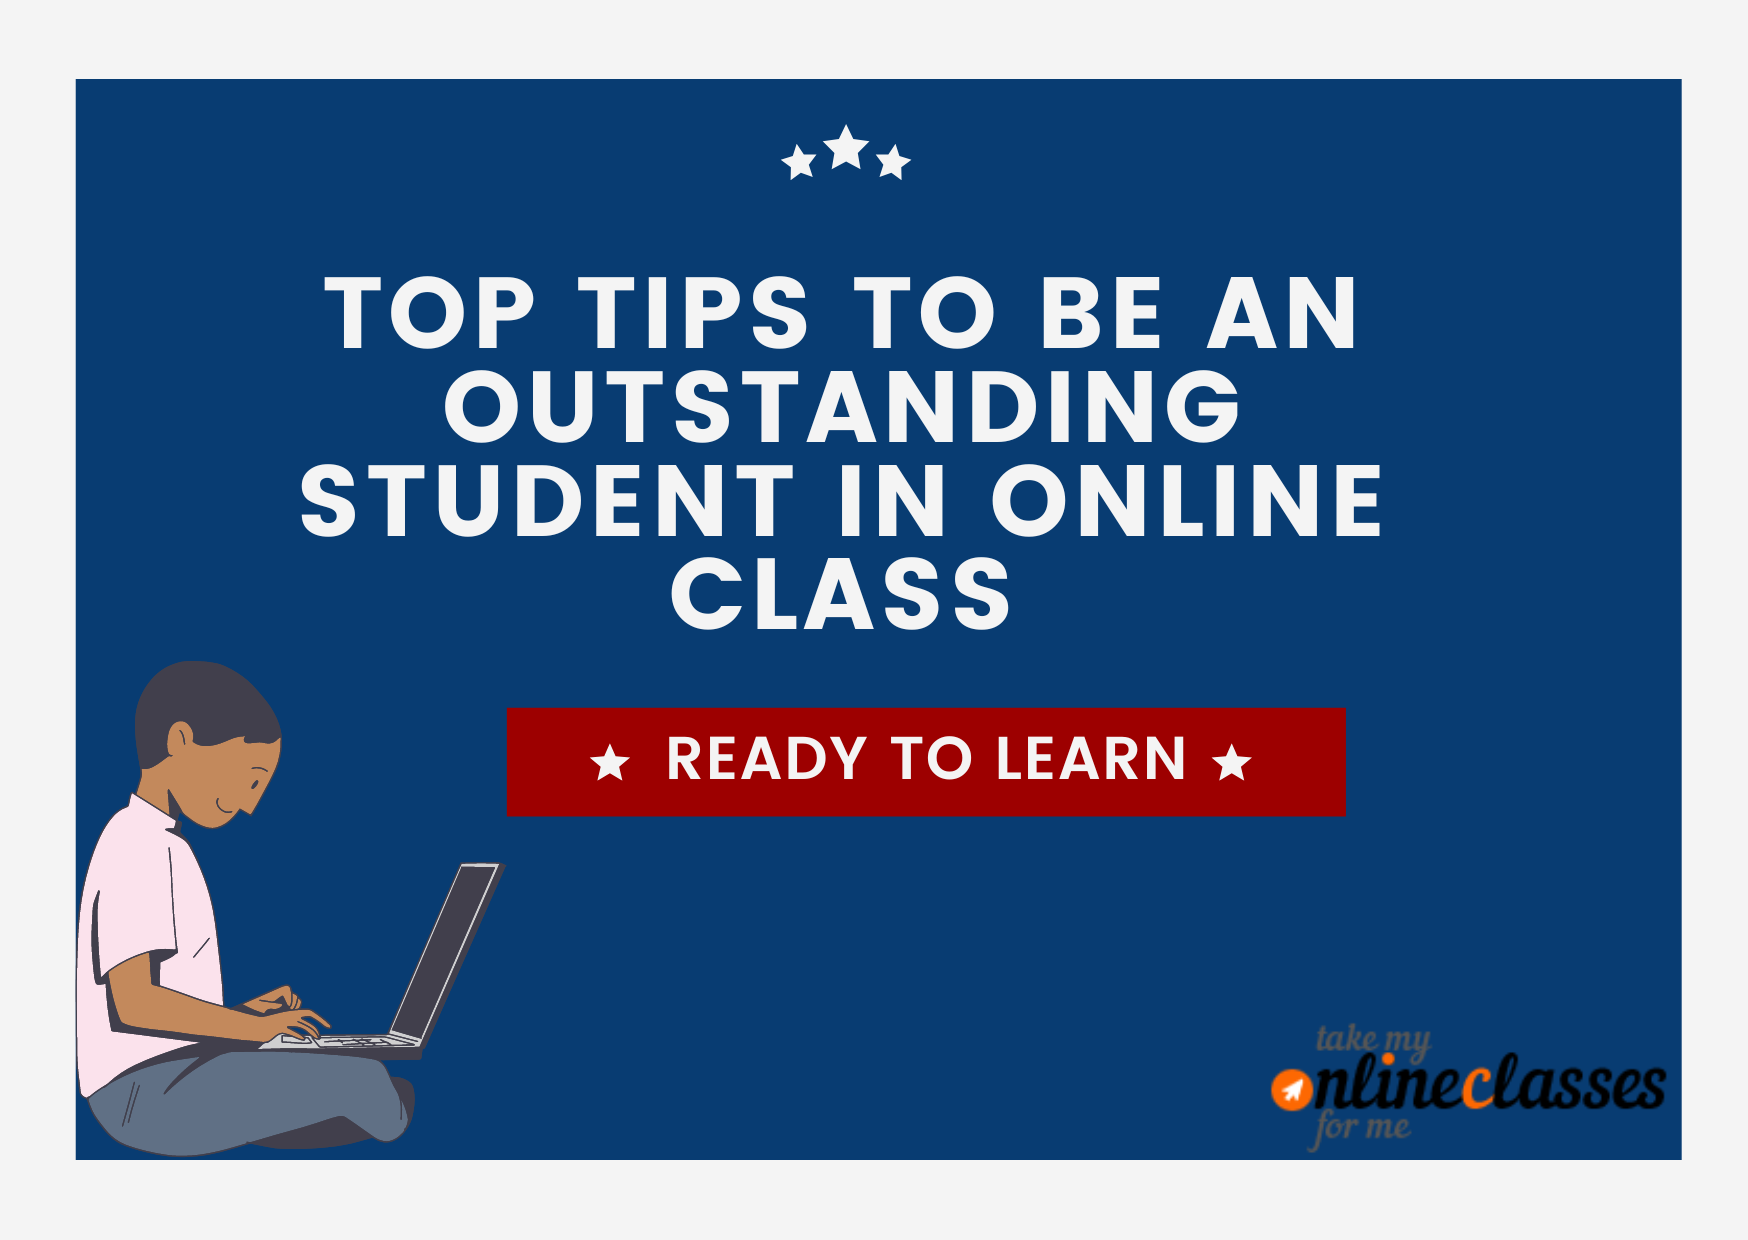 Top Tips To Be An Outstanding Student In Online Class